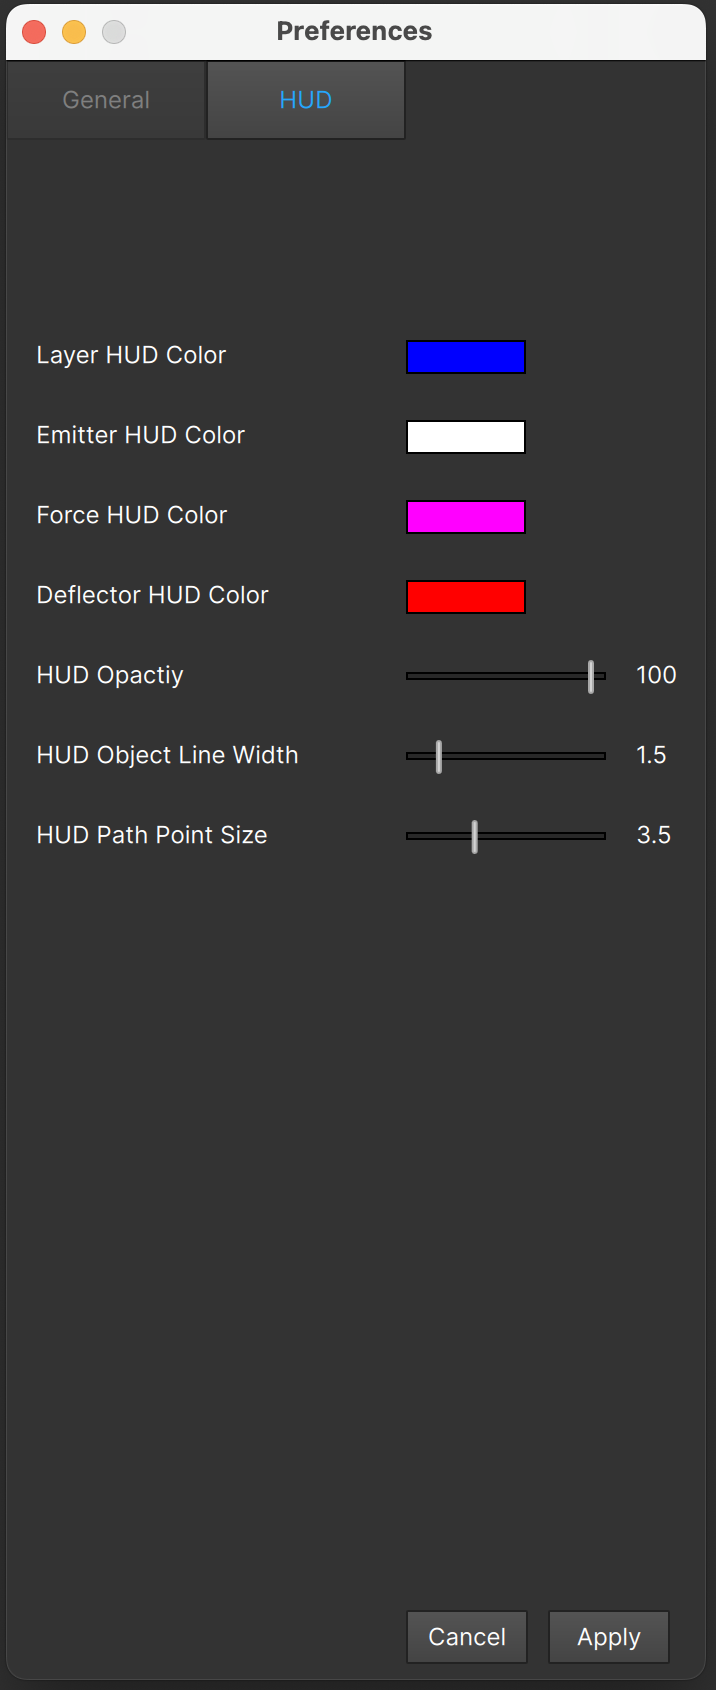 Heads Up Display Preferences